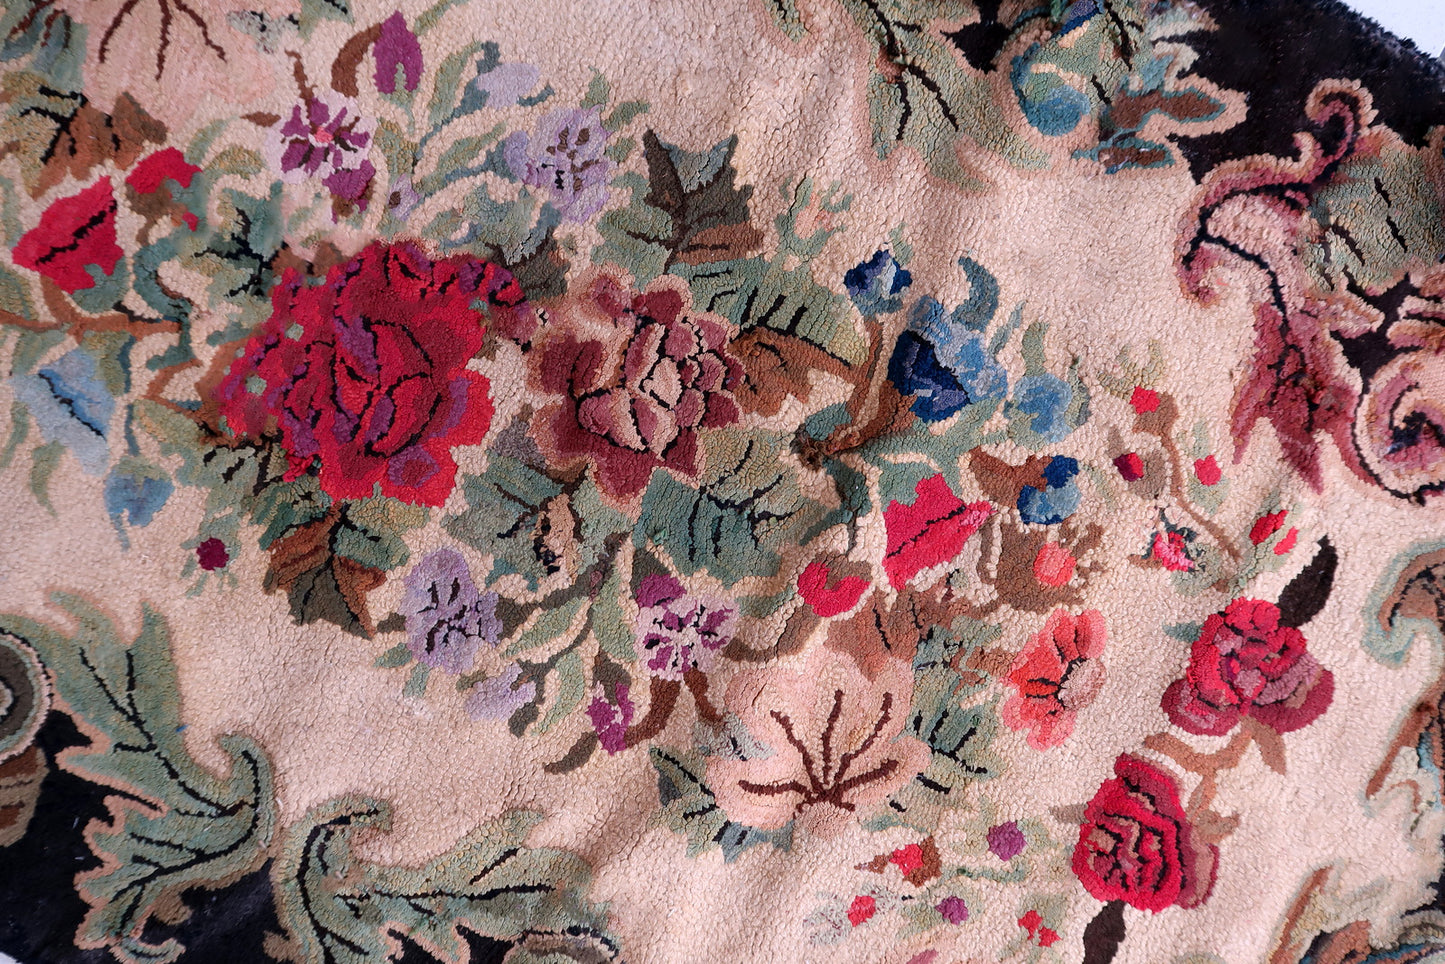 Handmade antique American Hooked rug in floral design. The rug is from the end of 19th century. It is in good condition, has some old restorations. It is Victorian period rug.